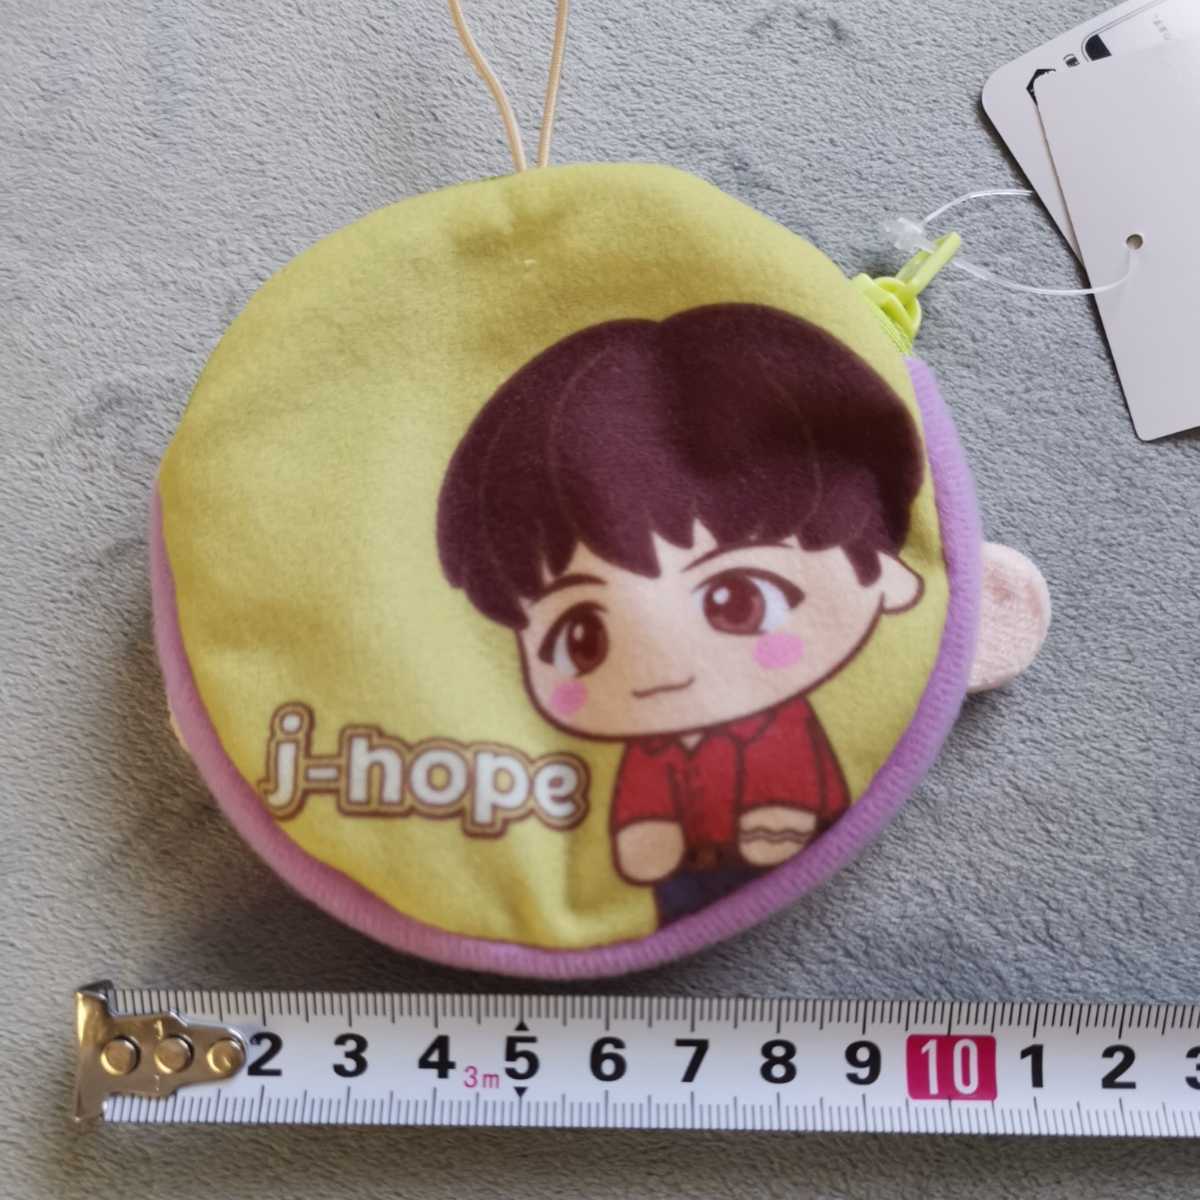 TinyTAN Thai knee tongue J-hopemo Aplus Mini pouch BTS prize tag equipped pouch 